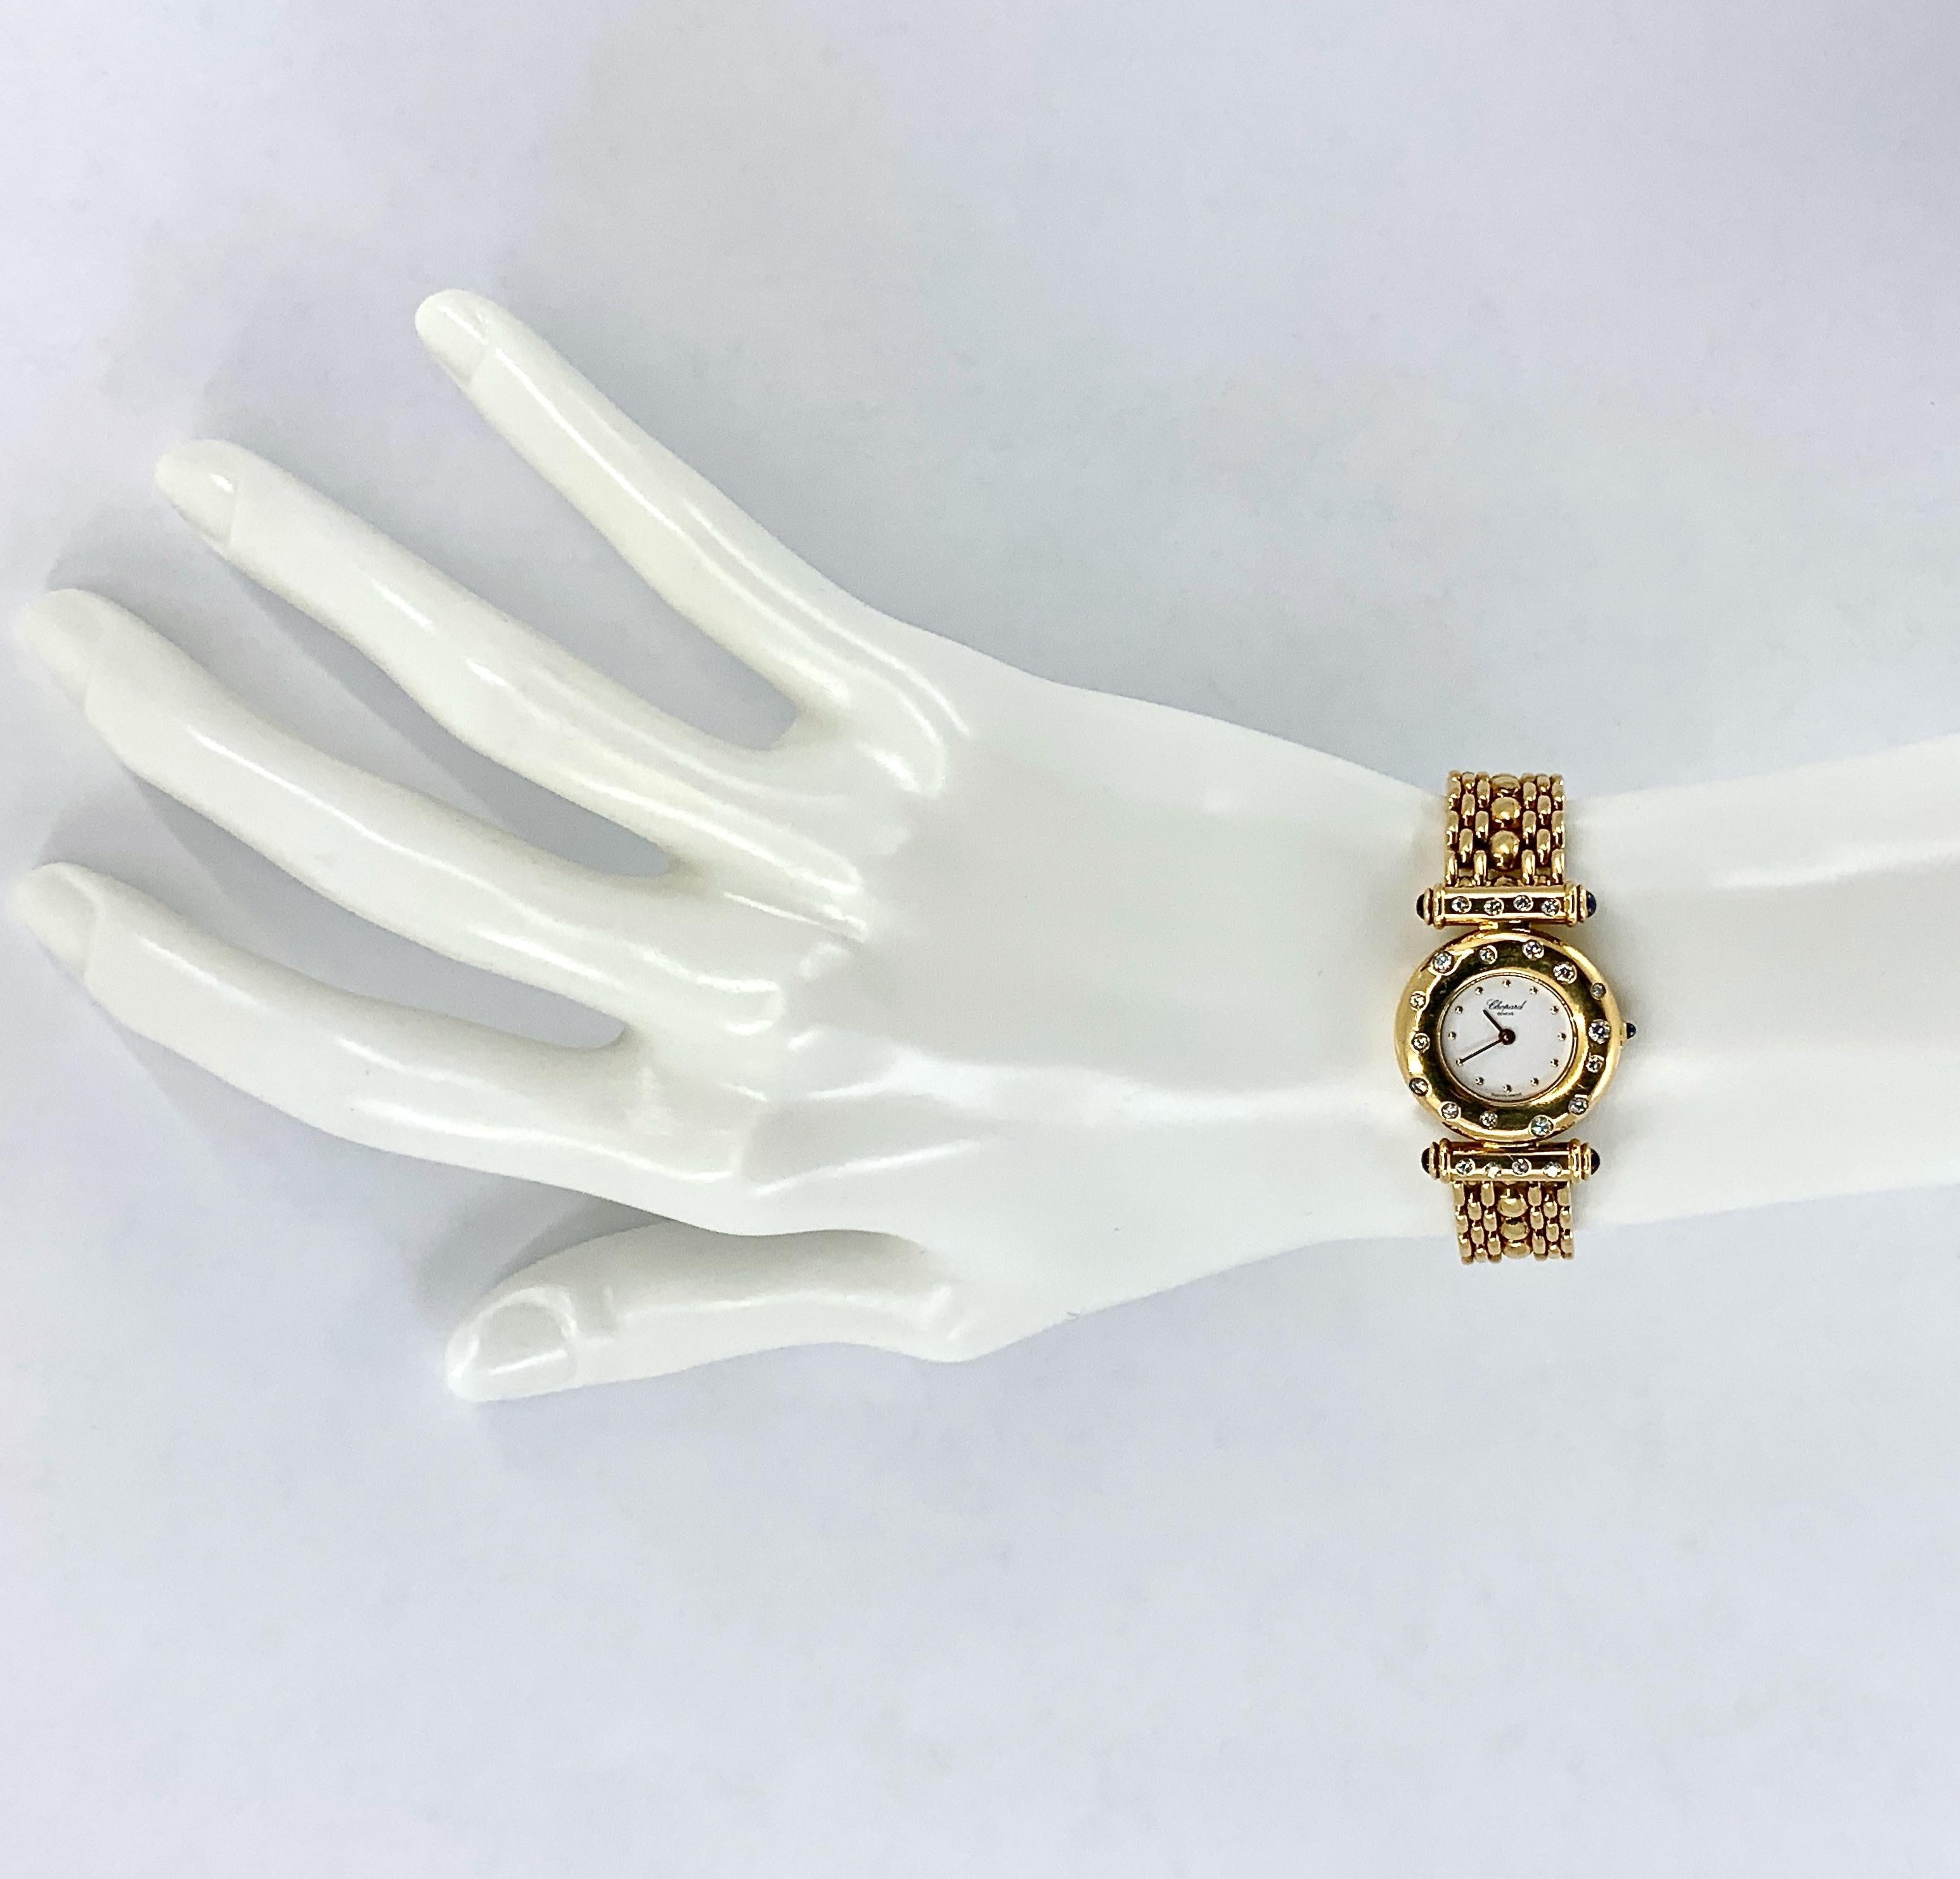 This beautiful, hard-to-find late 20th century timepiece features a round white face with gold dot hours within a wide, rounded bezel punctuated with clean white diamonds.  The Imperiale-style lug bars are also set with diamonds.  The crown and the